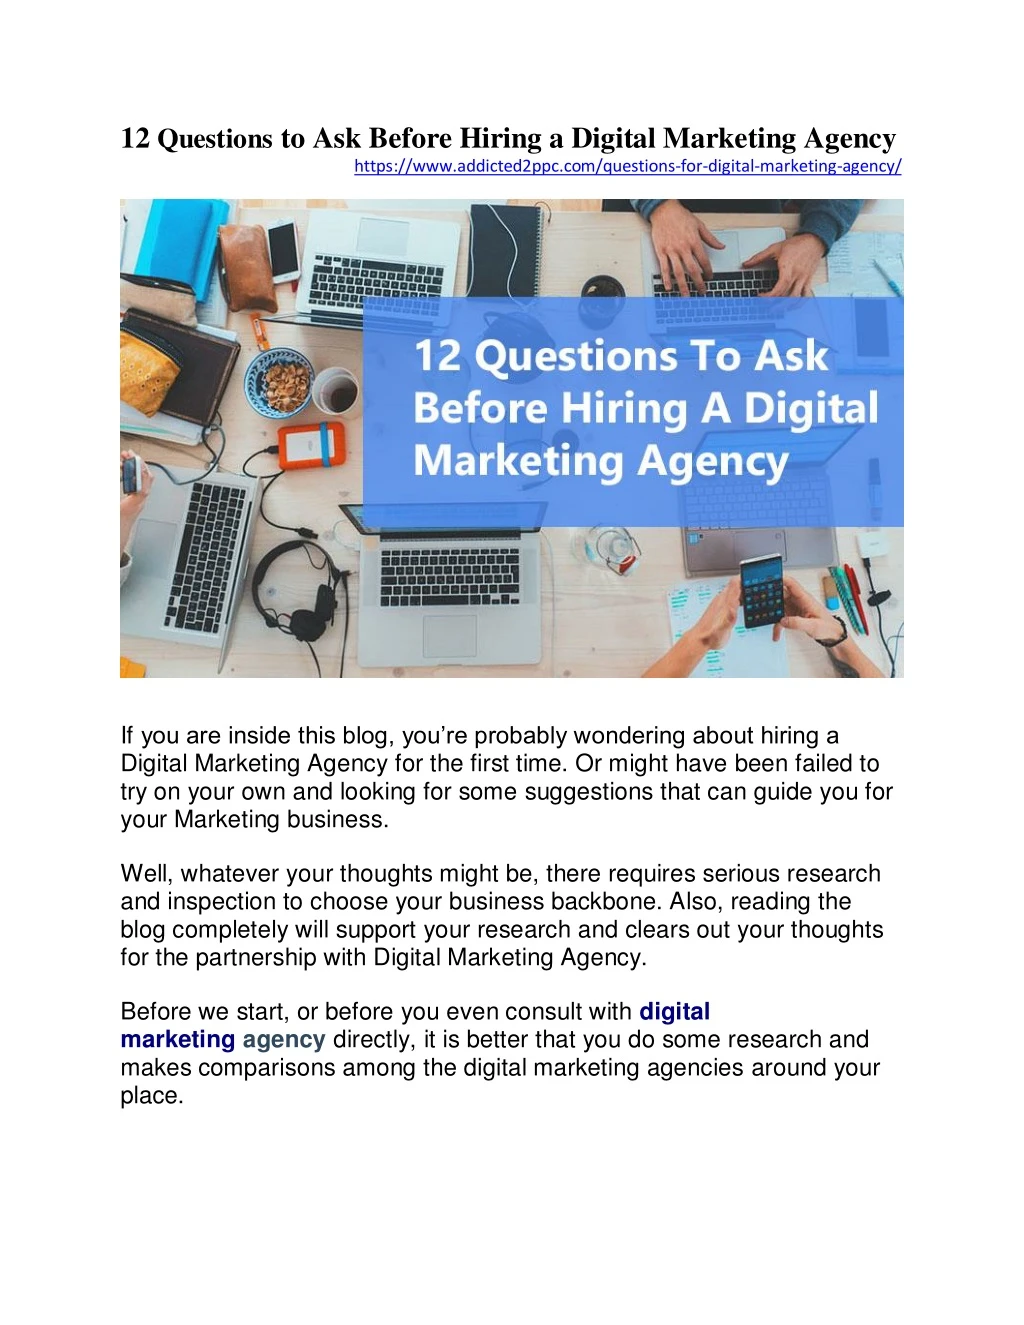 12 questions to ask before hiring a digital